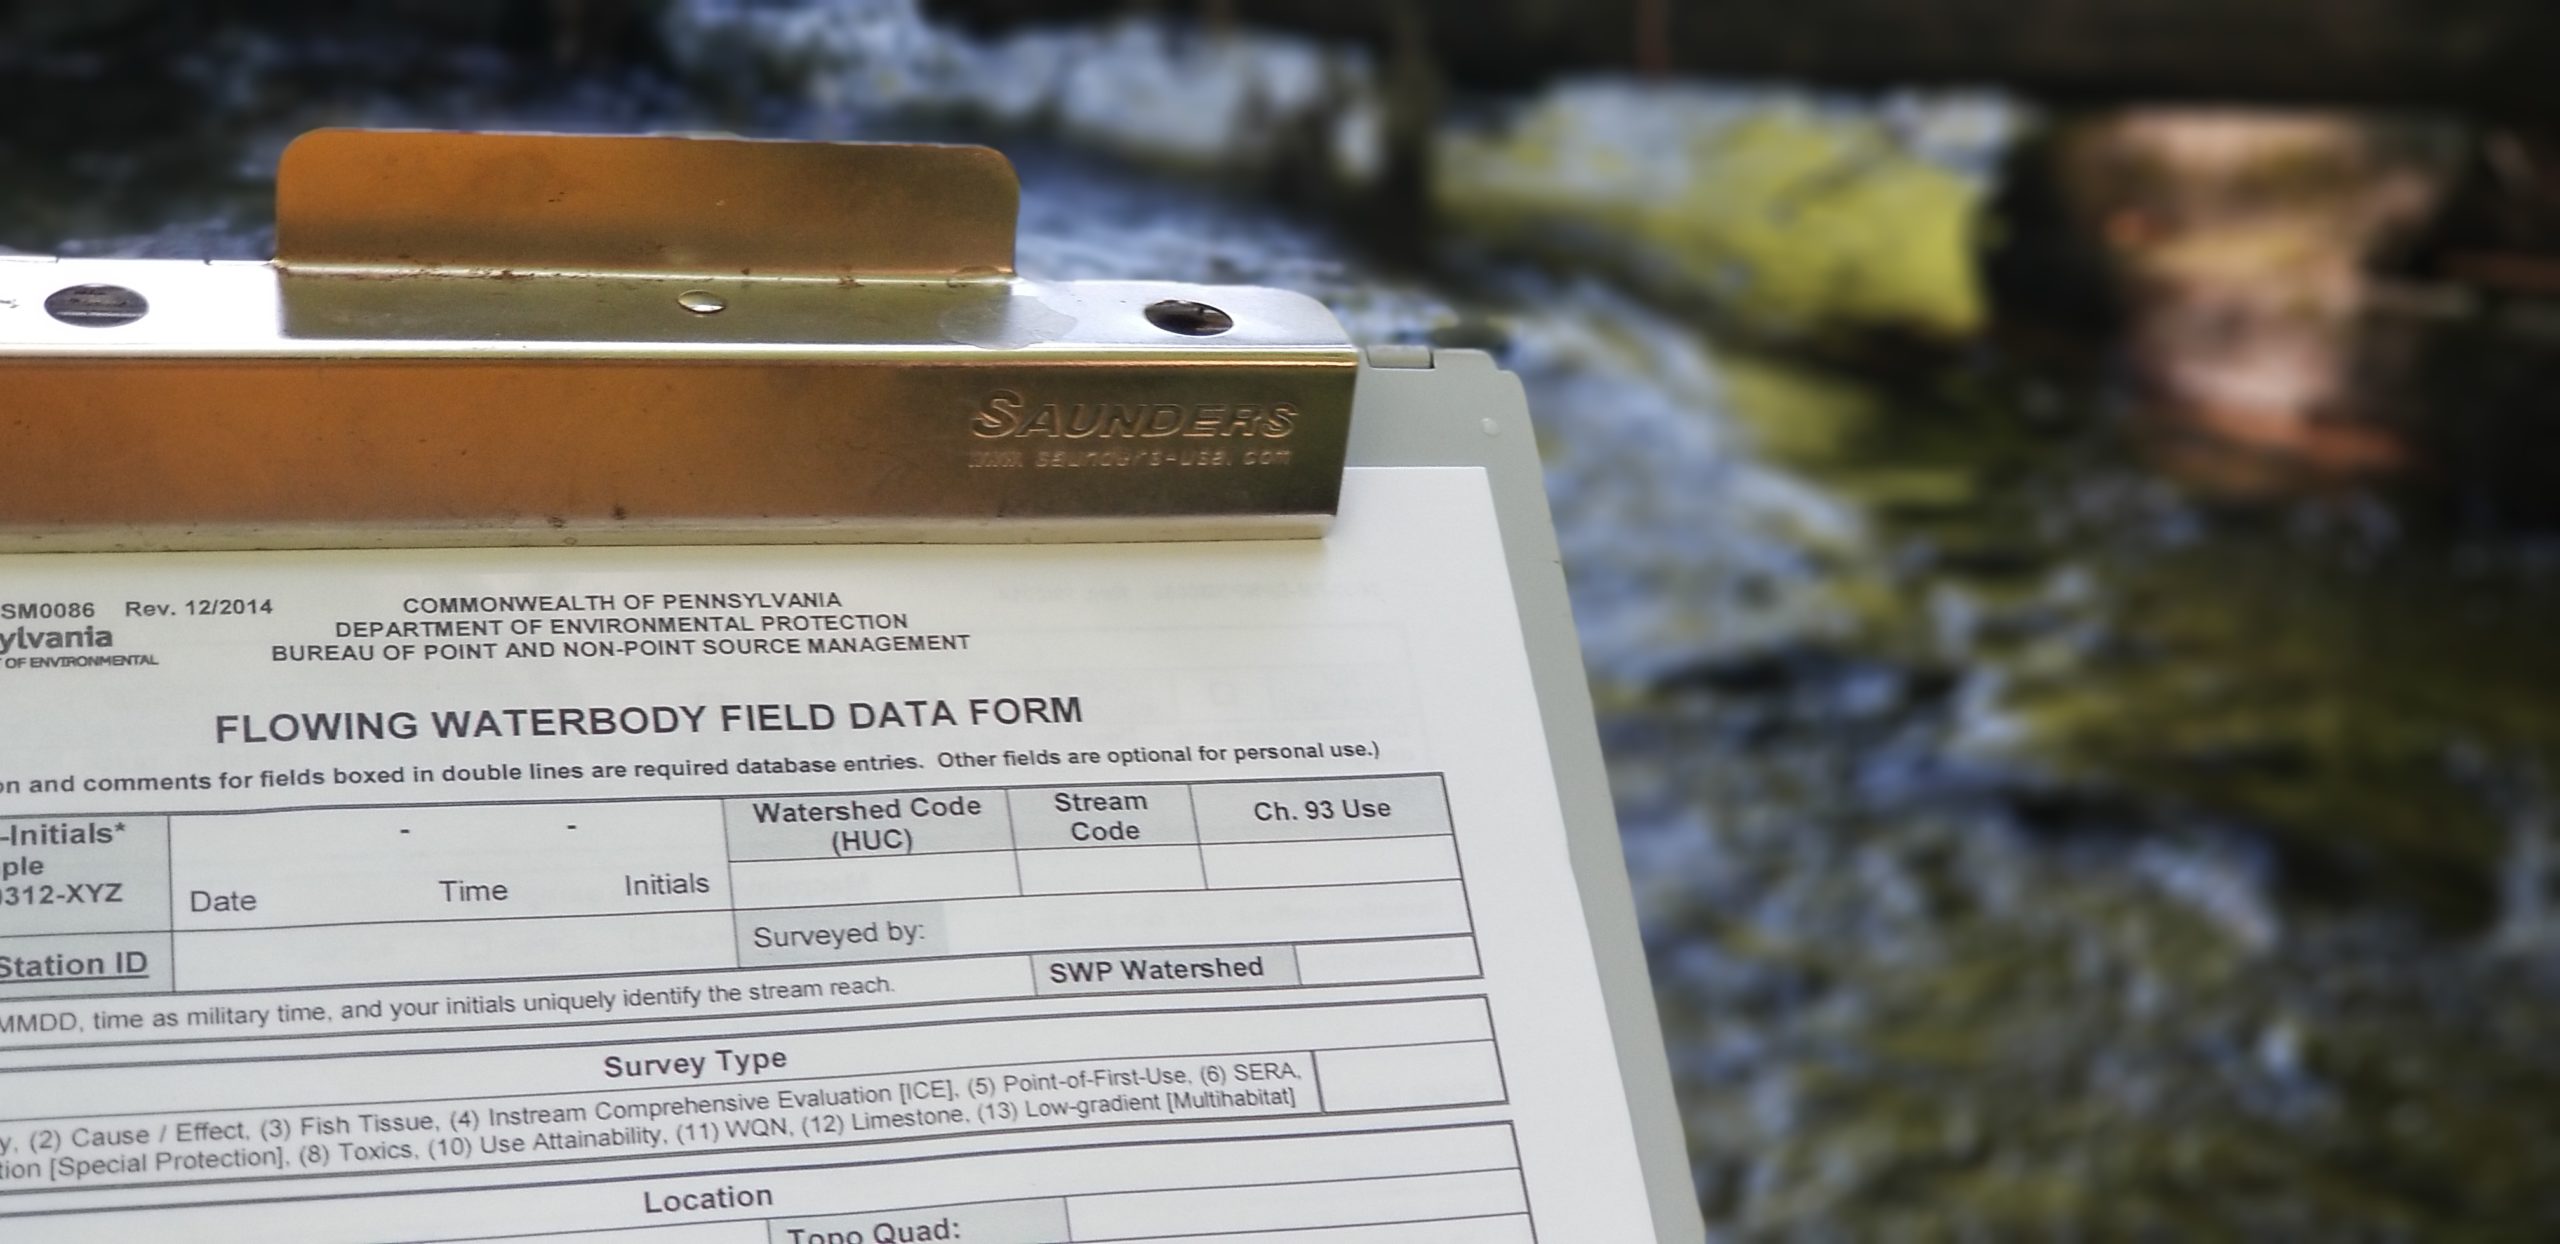 A closeup of a clipboard holding a form titled "Flowing Waterbody Field Data Form"